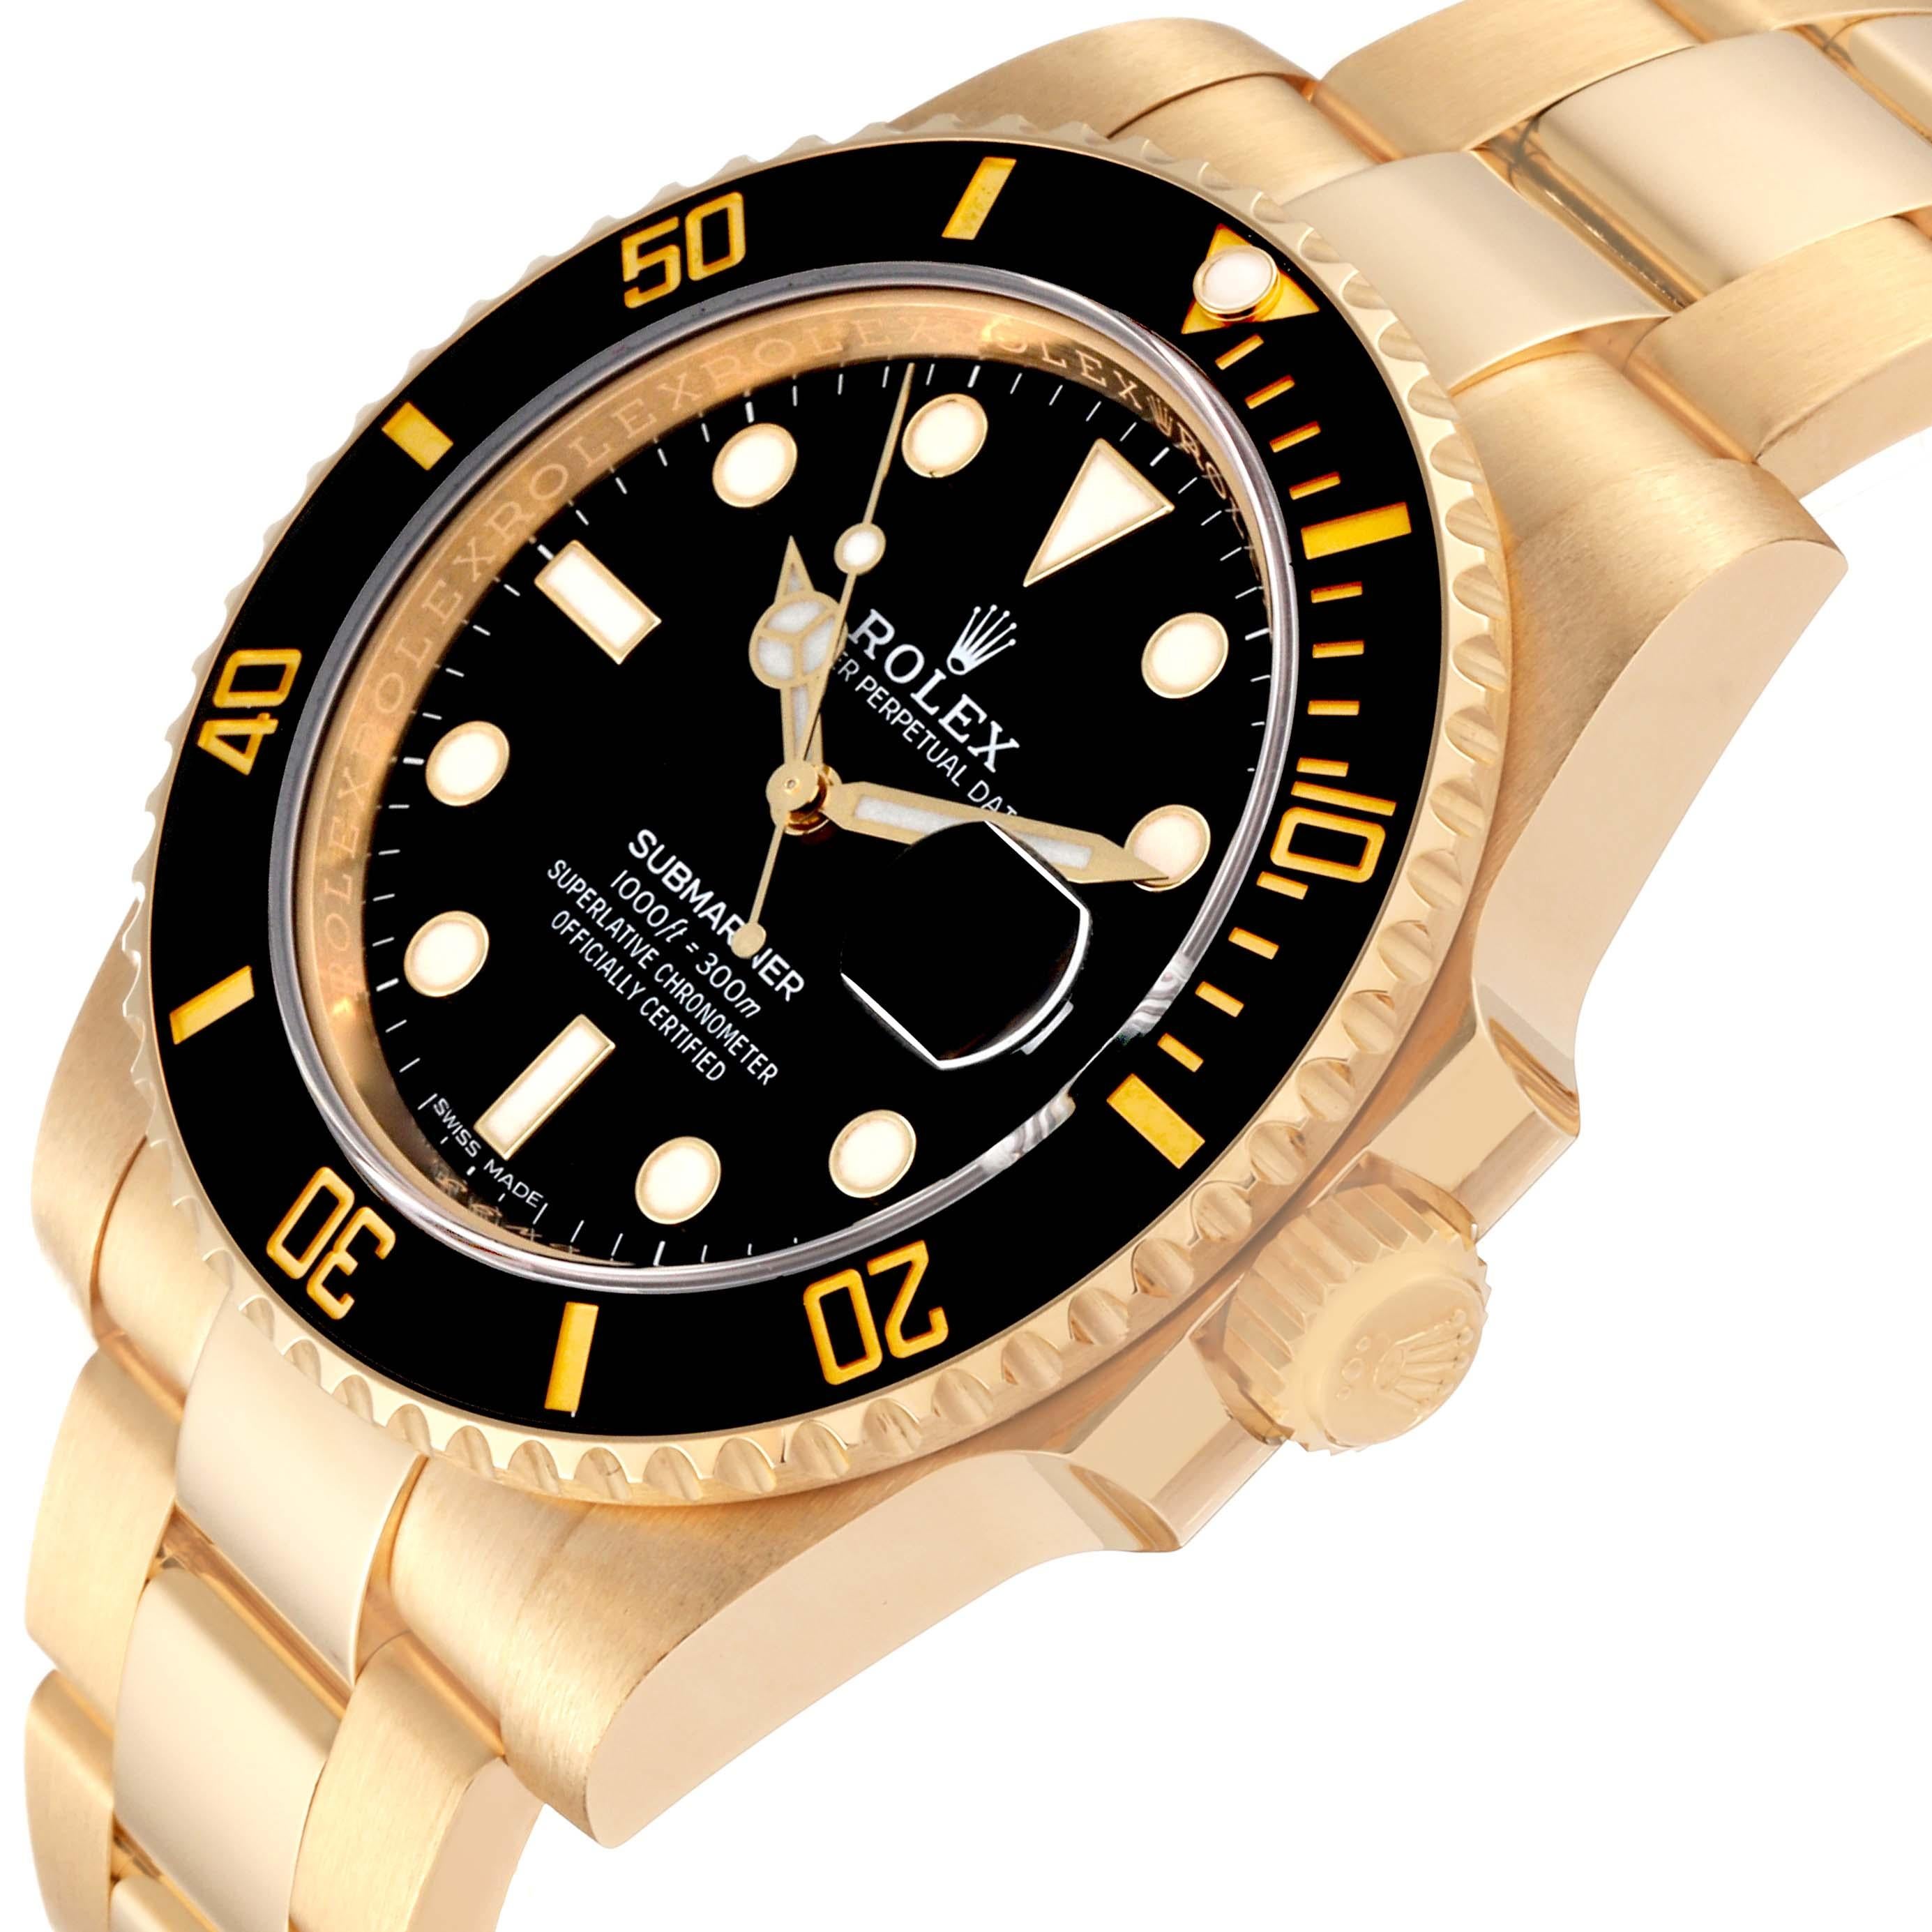 Rolex Submariner Black Dial Yellow Gold Mens Watch 116618 Box Card For Sale 2